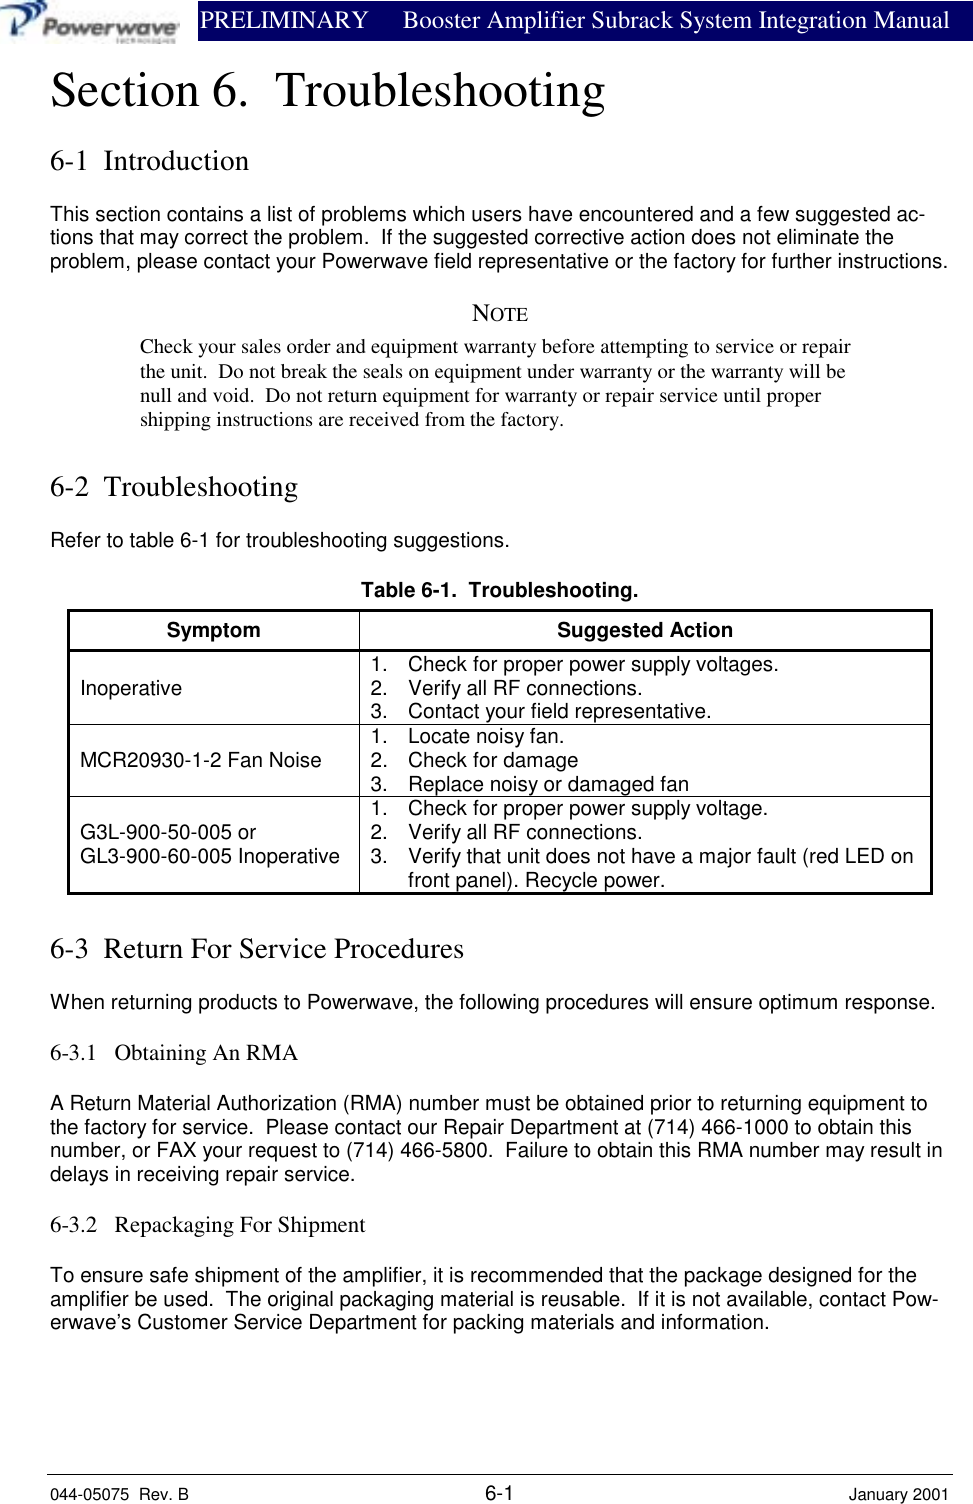                PRELIMINARY Booster Amplifier Subrack System Integration Manual044-05075  Rev. B 6-1 January 2001Section 6.  Troubleshooting6-1  IntroductionThis section contains a list of problems which users have encountered and a few suggested ac-tions that may correct the problem.  If the suggested corrective action does not eliminate theproblem, please contact your Powerwave field representative or the factory for further instructions.NOTECheck your sales order and equipment warranty before attempting to service or repairthe unit.  Do not break the seals on equipment under warranty or the warranty will benull and void.  Do not return equipment for warranty or repair service until propershipping instructions are received from the factory.6-2  TroubleshootingRefer to table 6-1 for troubleshooting suggestions.Table 6-1.  Troubleshooting.Symptom Suggested ActionInoperative 1.  Check for proper power supply voltages.2.  Verify all RF connections.3.  Contact your field representative.MCR20930-1-2 Fan Noise 1.  Locate noisy fan.2.  Check for damage3.  Replace noisy or damaged fanG3L-900-50-005 orGL3-900-60-005 Inoperative1.  Check for proper power supply voltage.2.  Verify all RF connections.3.  Verify that unit does not have a major fault (red LED onfront panel). Recycle power.6-3  Return For Service ProceduresWhen returning products to Powerwave, the following procedures will ensure optimum response.6-3.1   Obtaining An RMAA Return Material Authorization (RMA) number must be obtained prior to returning equipment tothe factory for service.  Please contact our Repair Department at (714) 466-1000 to obtain thisnumber, or FAX your request to (714) 466-5800.  Failure to obtain this RMA number may result indelays in receiving repair service.6-3.2   Repackaging For ShipmentTo ensure safe shipment of the amplifier, it is recommended that the package designed for theamplifier be used.  The original packaging material is reusable.  If it is not available, contact Pow-erwave’s Customer Service Department for packing materials and information.